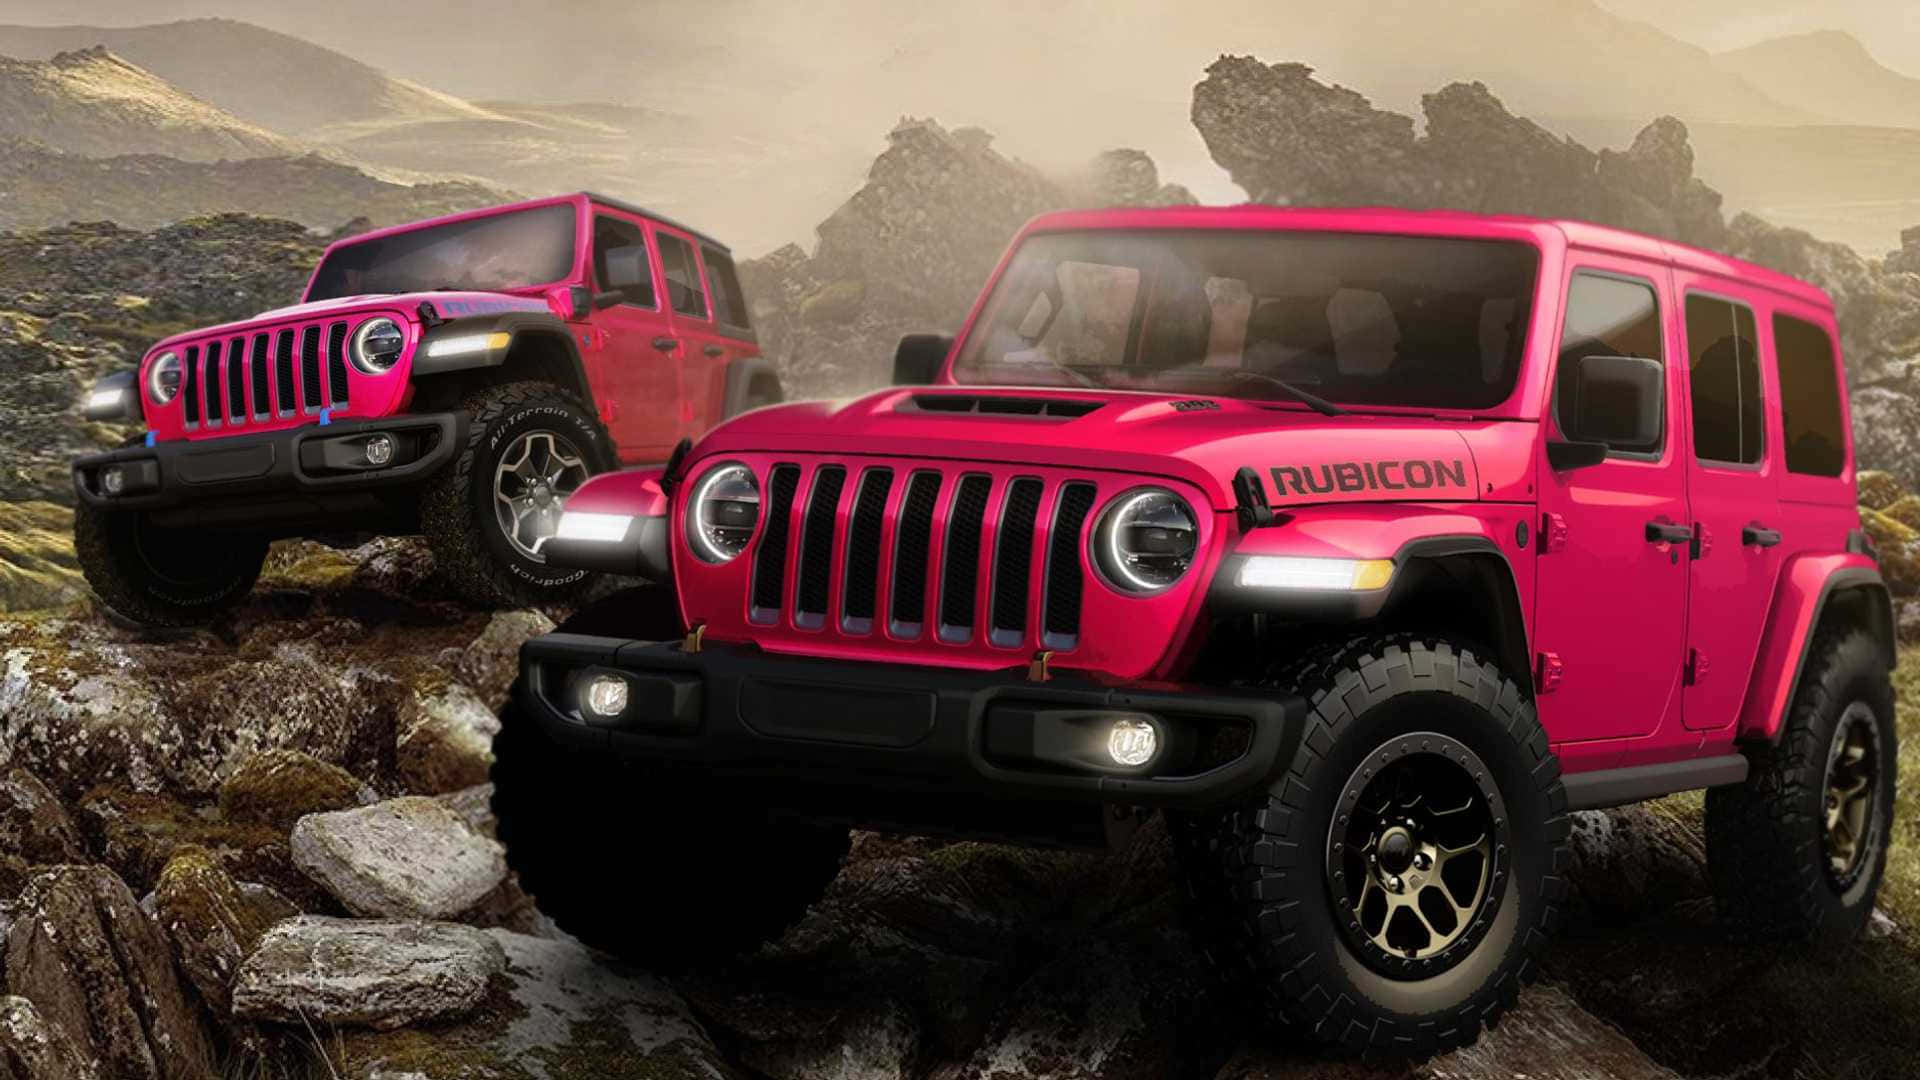 Conquer the Outdoors with a Tough and Dependable Jeep